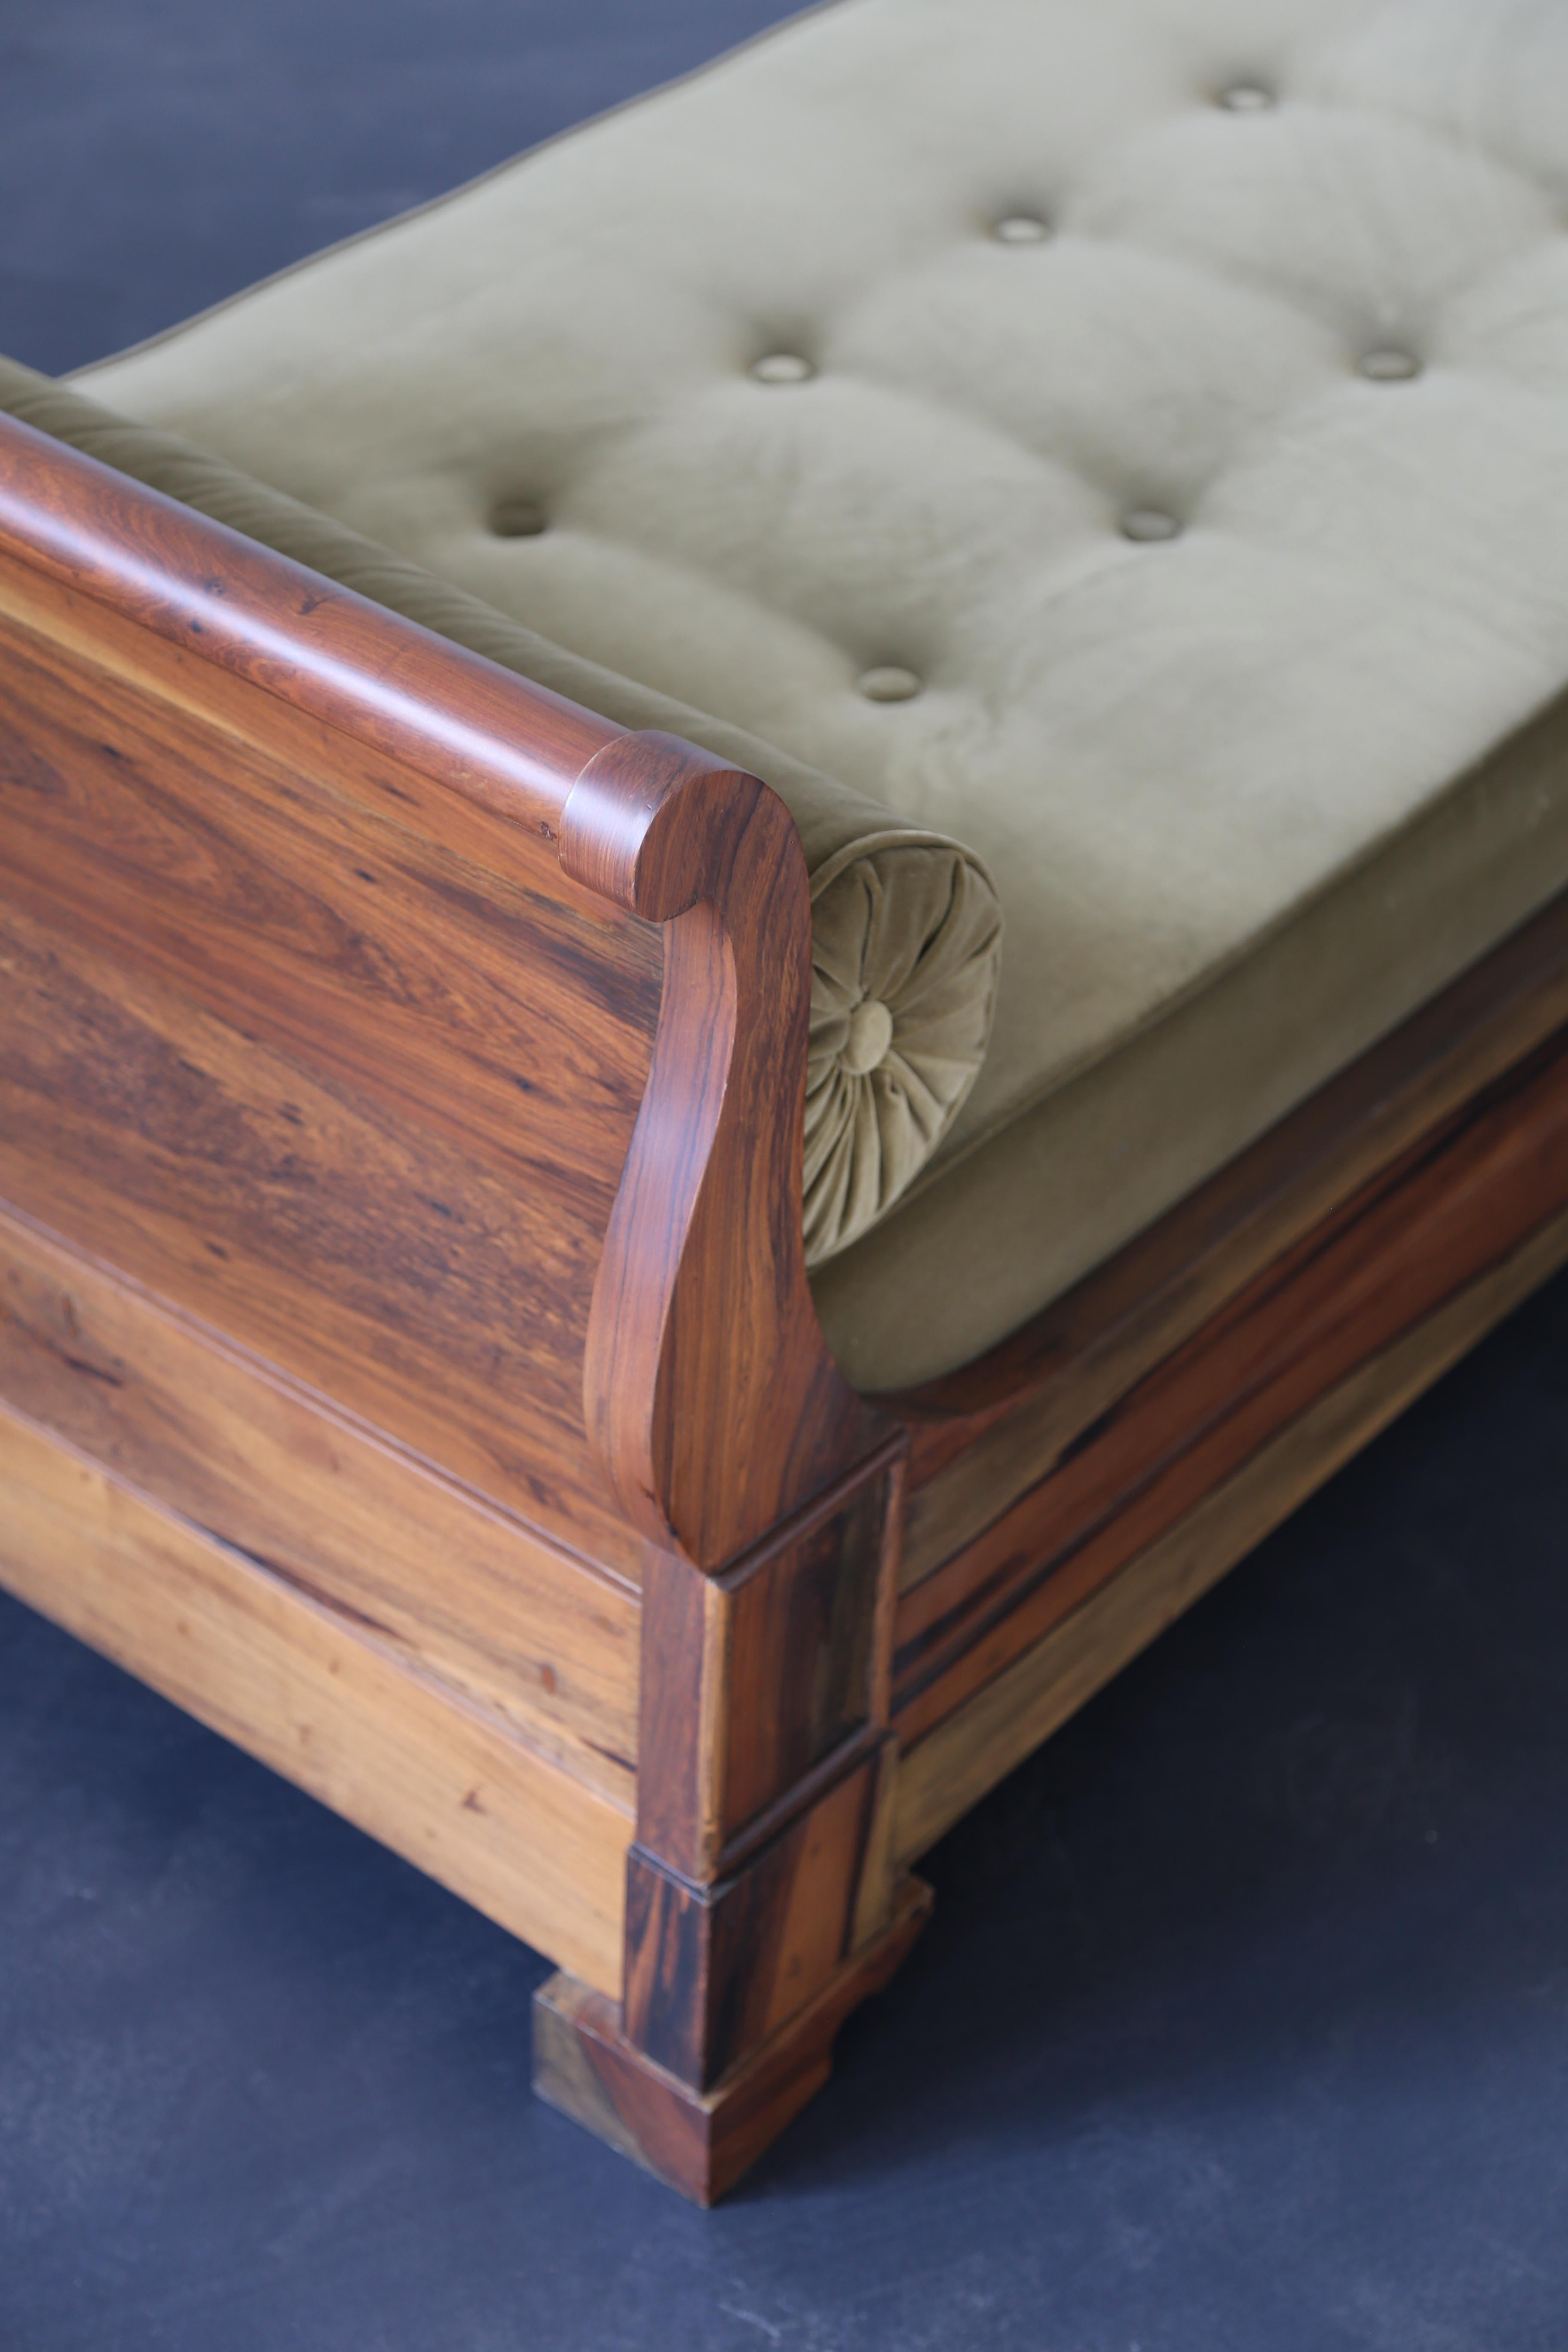 Napoleon III Napoleon Sleigh Daybed in Argentine Rosewood and Savel Elegance from Costantini